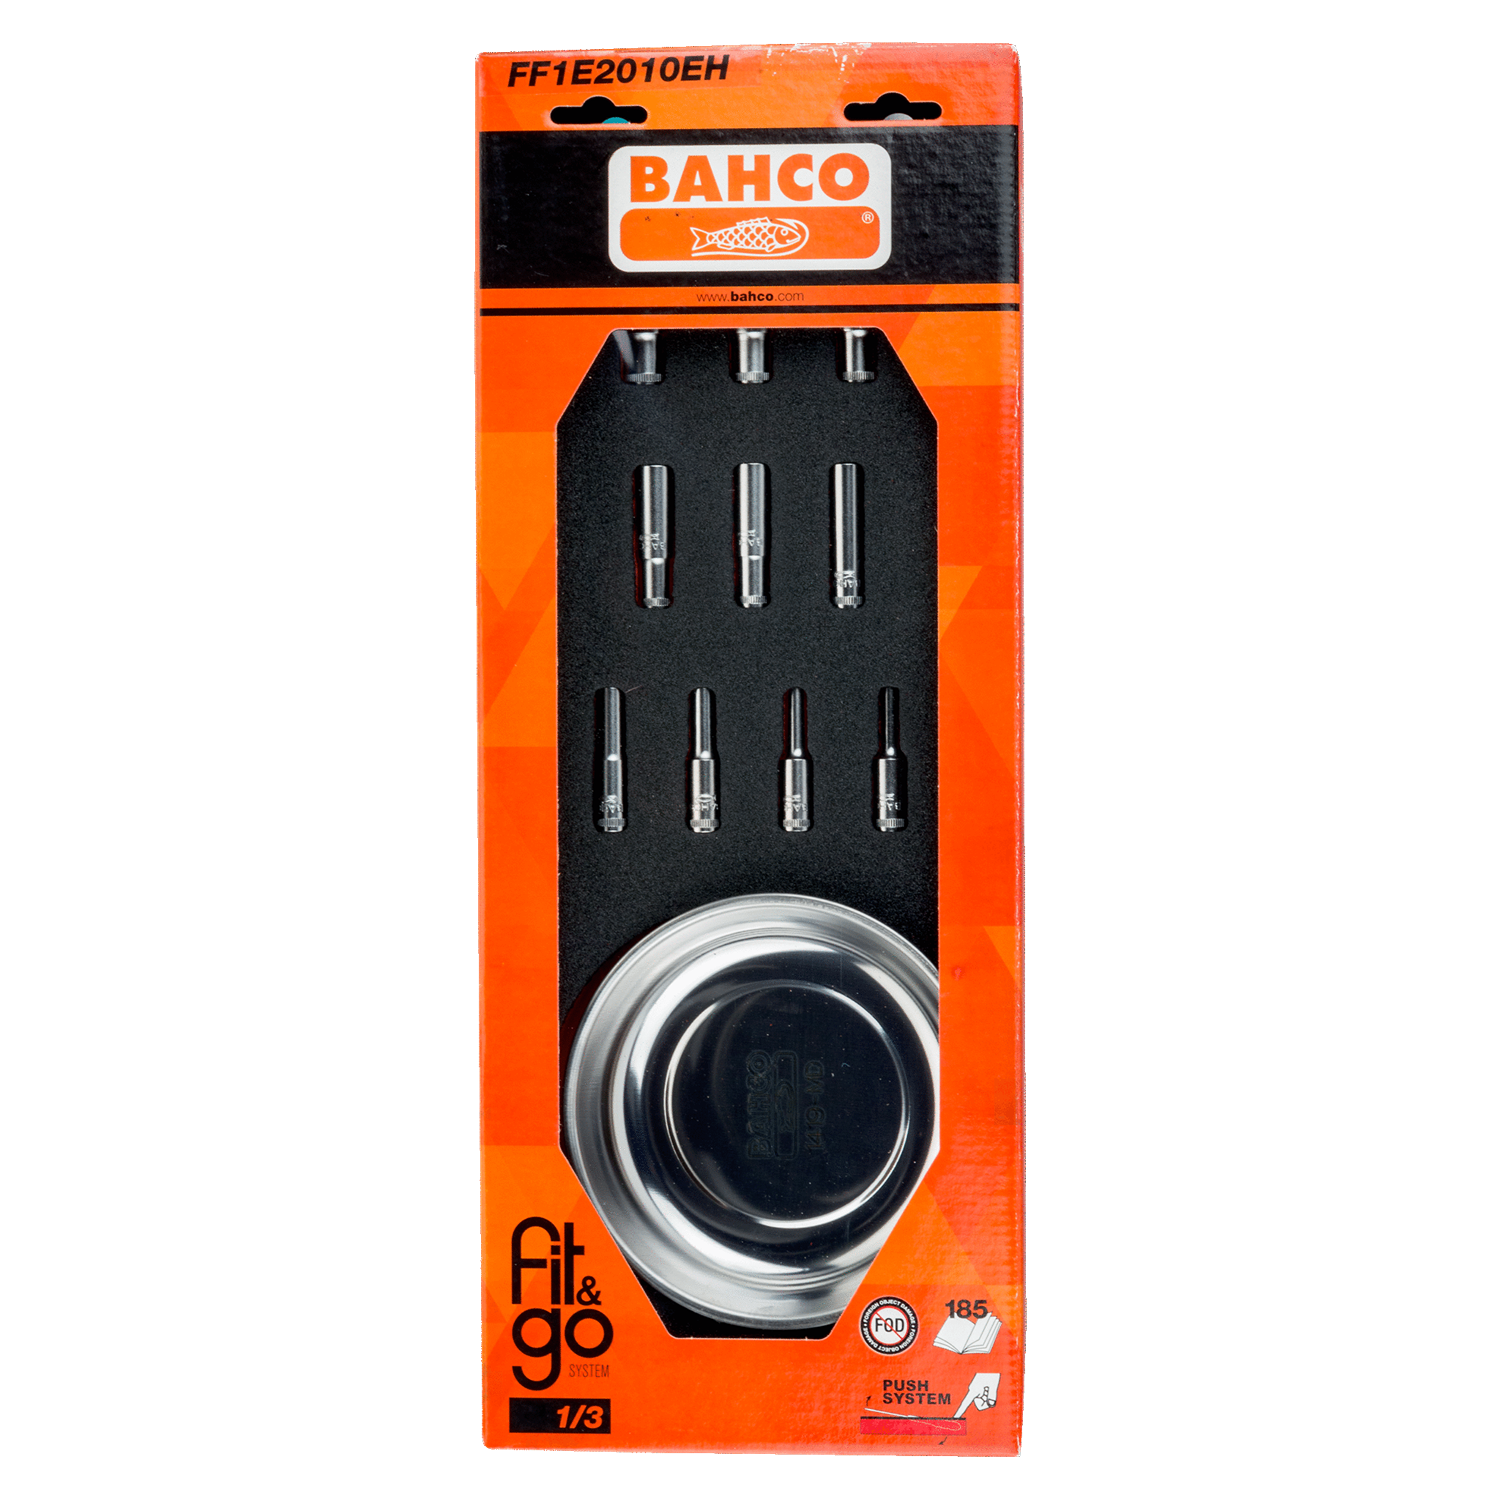 BAHCO FF1E2010EH Fit&Go 1/3 Foam Inlay 1/4” Deep Socket Set - Premium SOCKET SET from BAHCO - Shop now at Yew Aik.